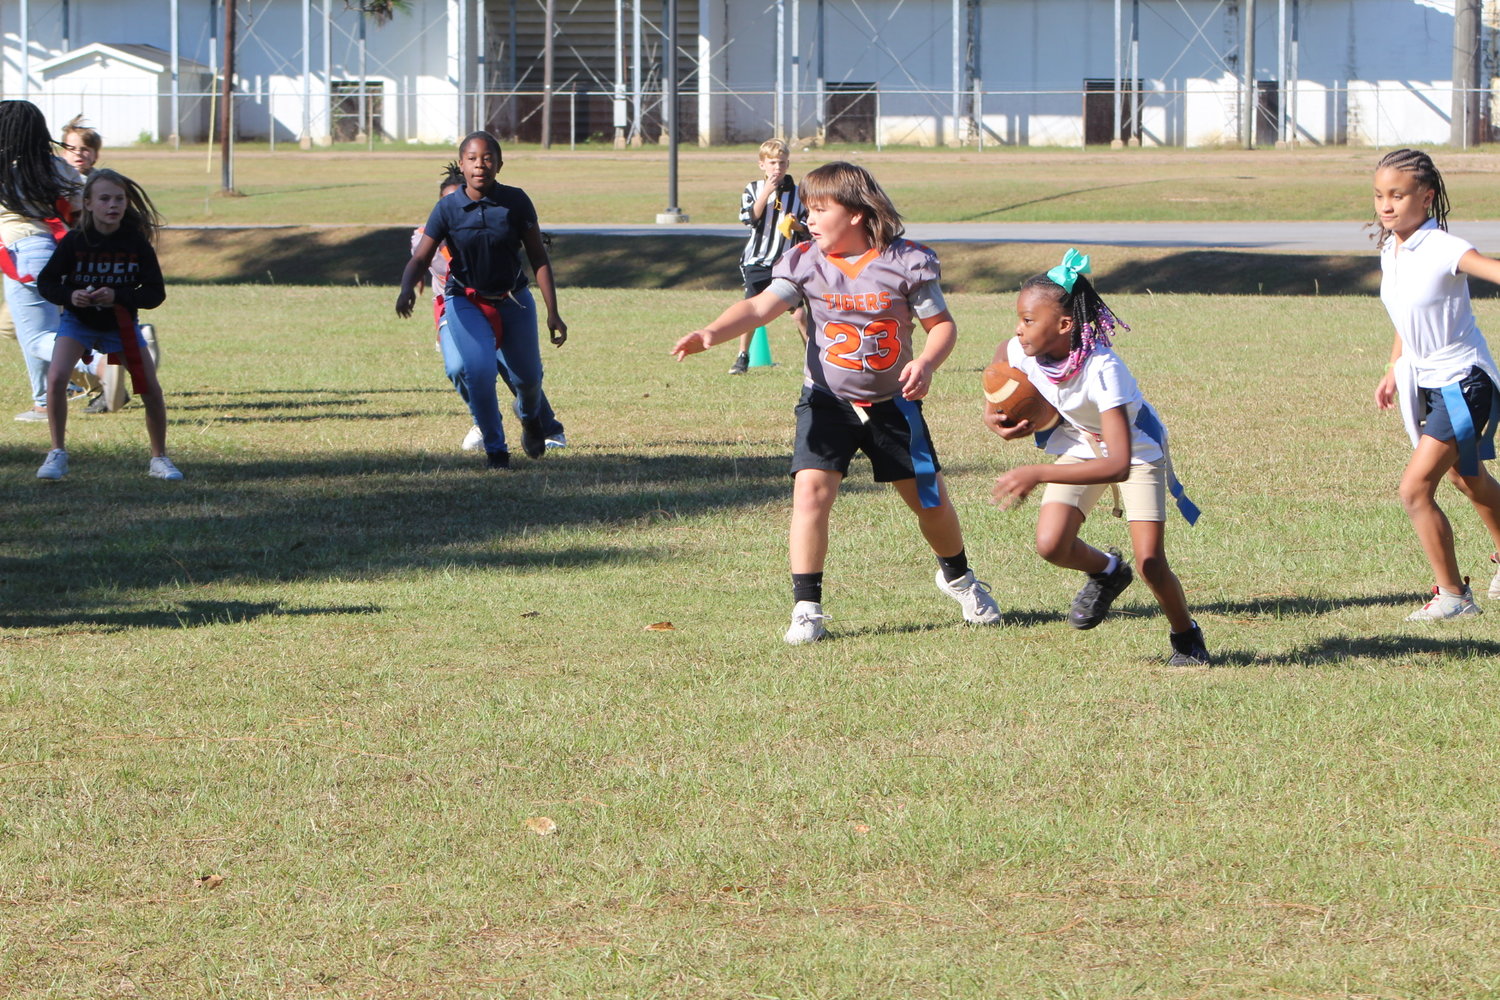 Eyes on the prize. A ball carrier looks for running room during the first round of the flag football playoffs Friday, Sept. 30, at Bay Minette Elementary School. The nine-week regular season has led to the postseason that will soon crown a champion.